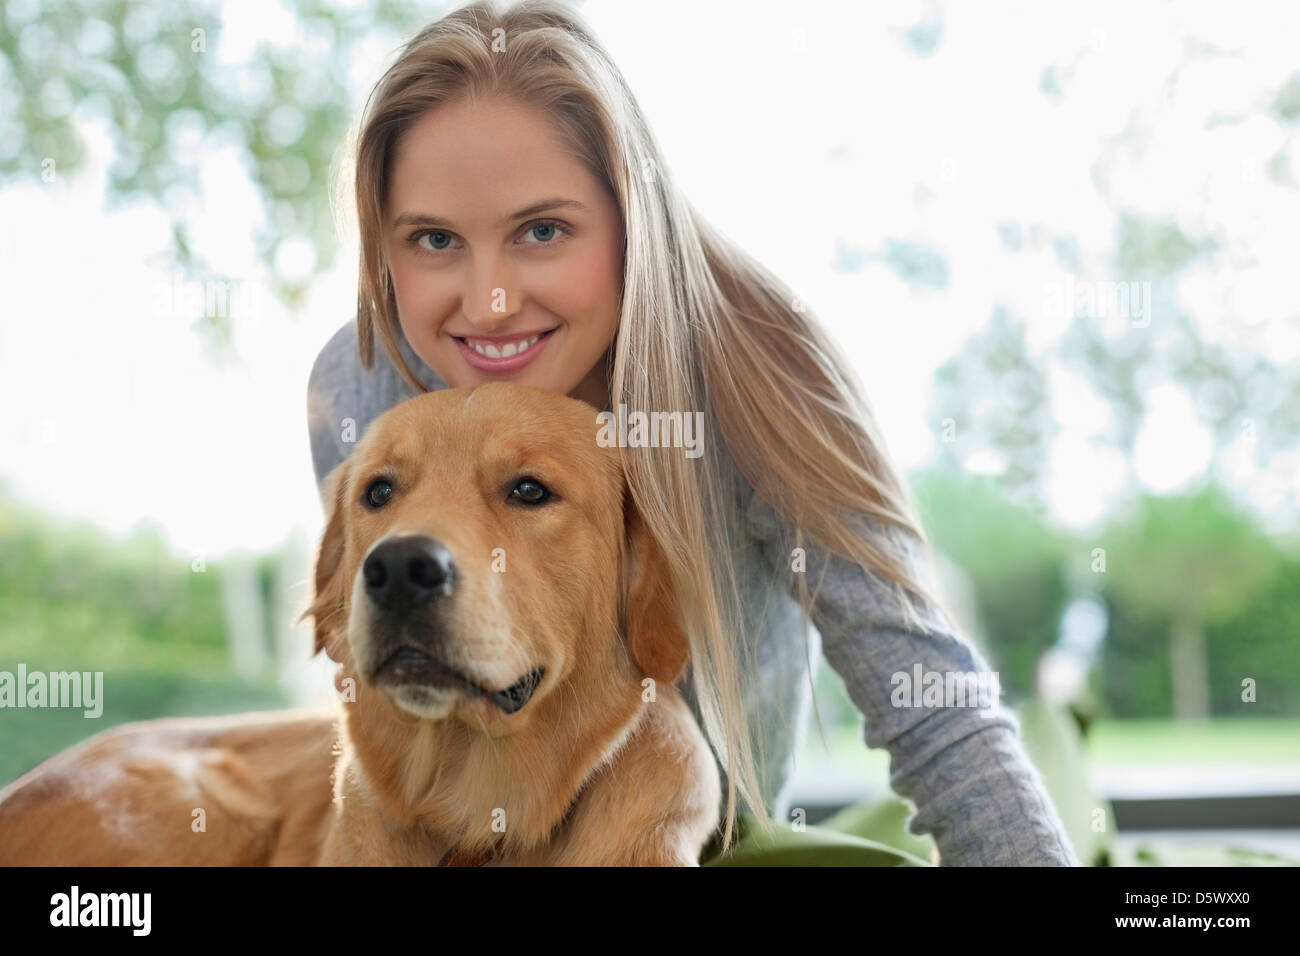 Woman relaxing with dog indoors Banque D'Images